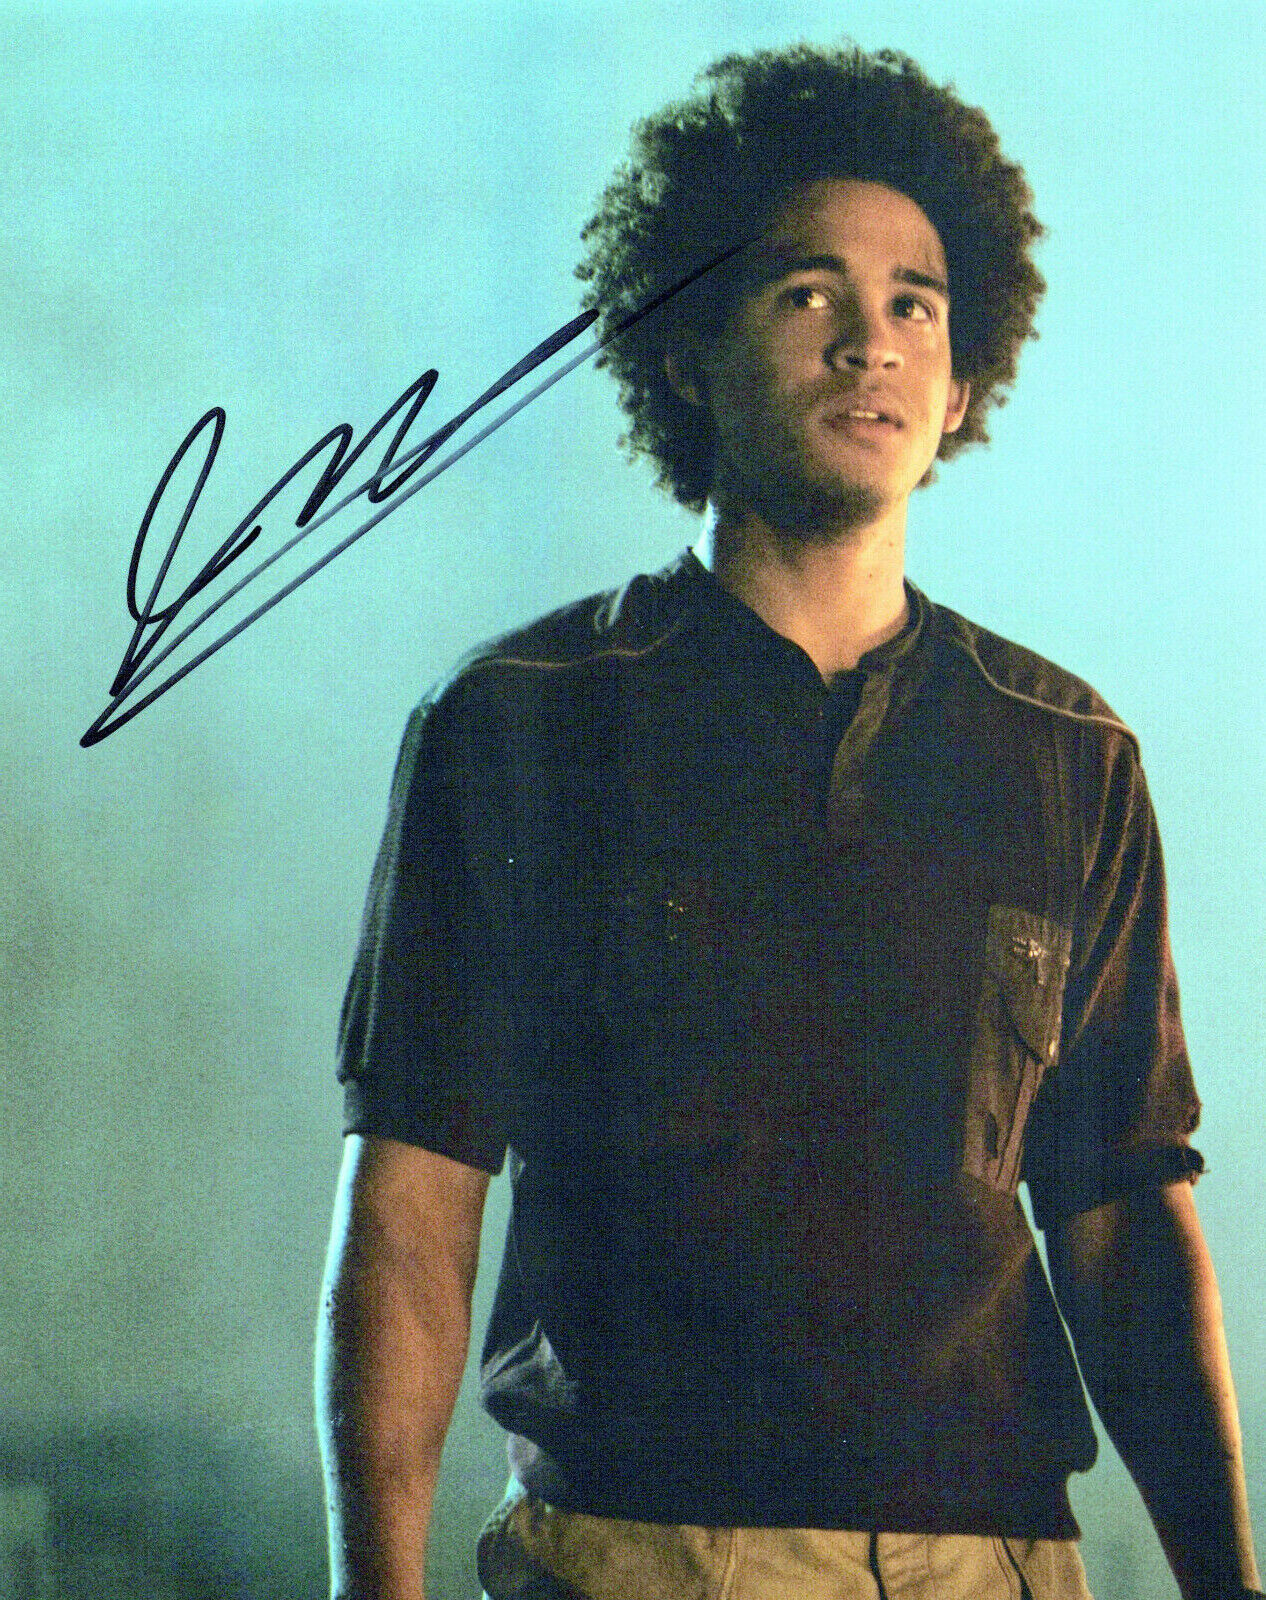 Jorge Lendeborg Jr. Bumblebee autographed Photo Poster painting signed 8x10 #1 Memo